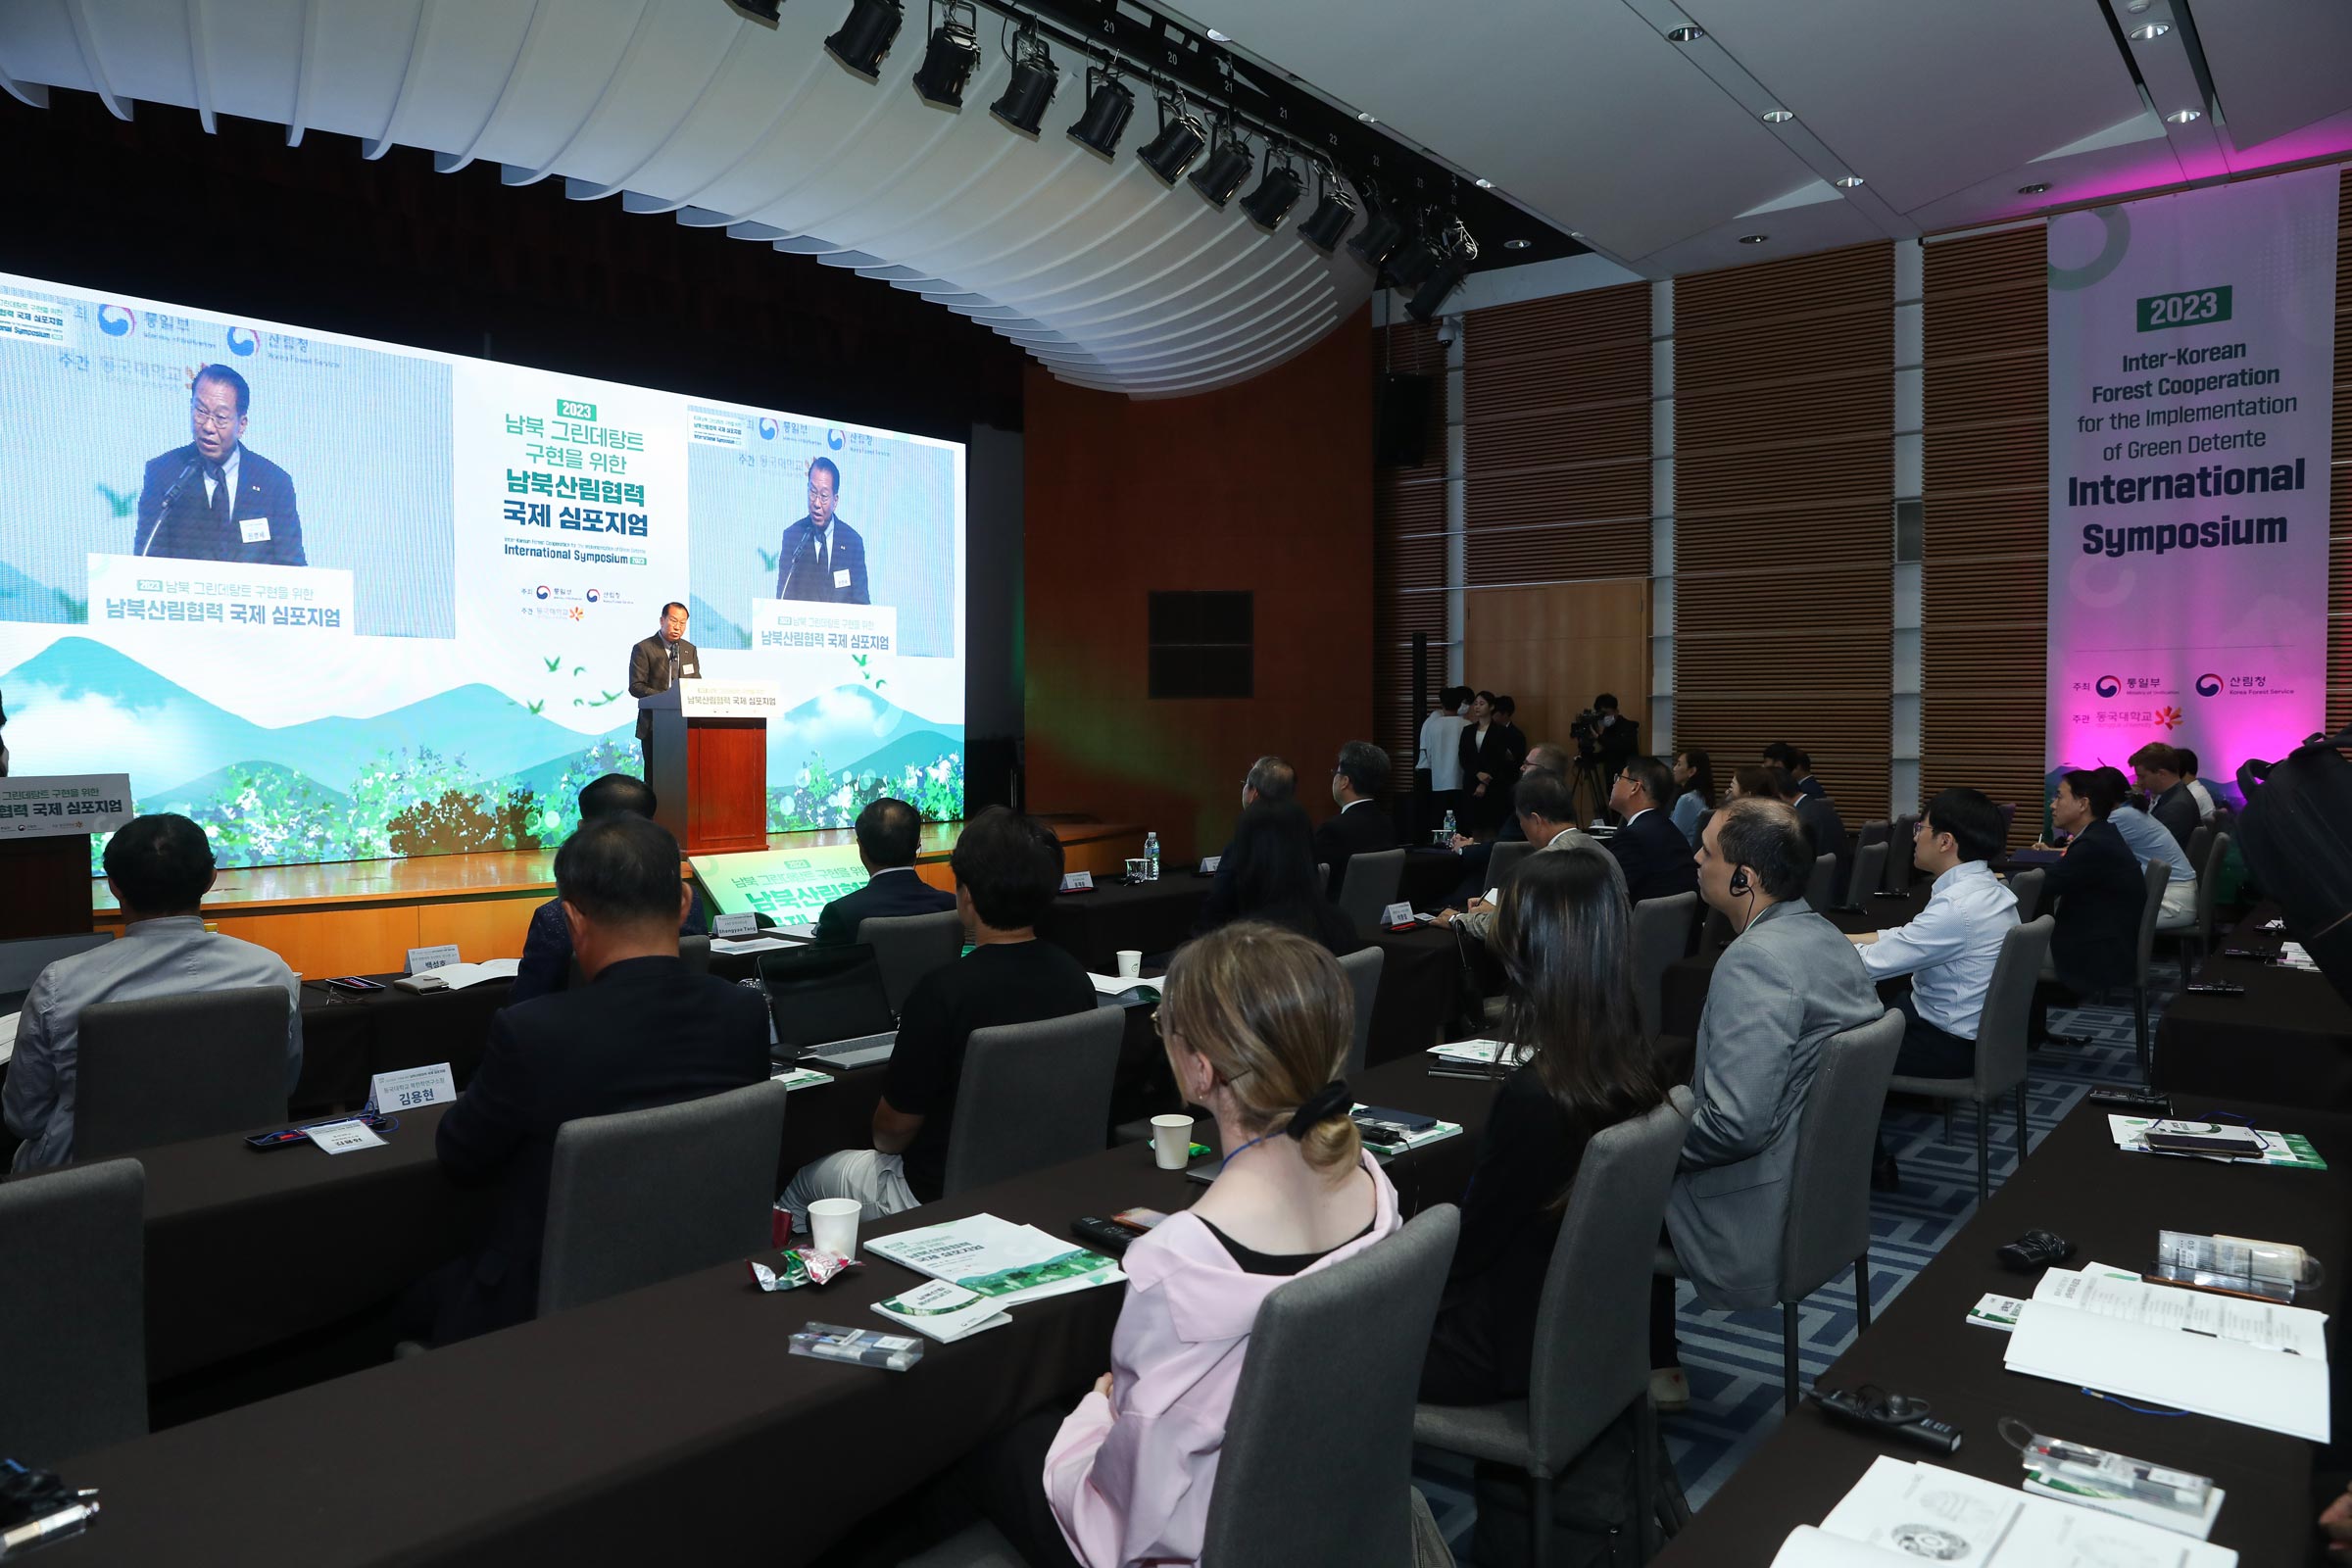 Minister Kwon Youngse delivers congratulatory remarks at the Inter-Korean Forest Cooperation Symposium